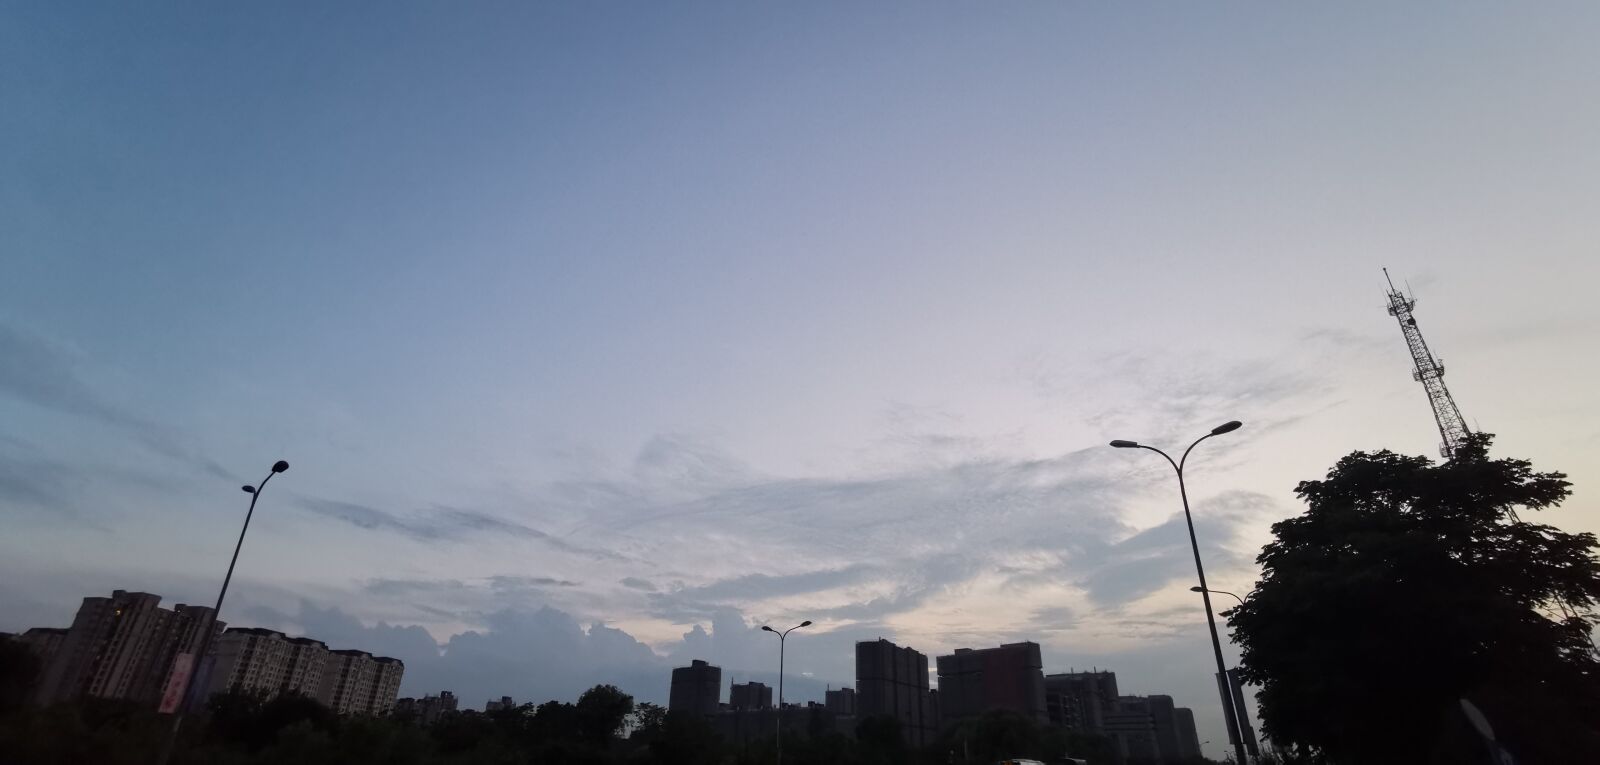 HUAWEI Mate 20 Pro sample photo. Cloud, at dusk, city photography